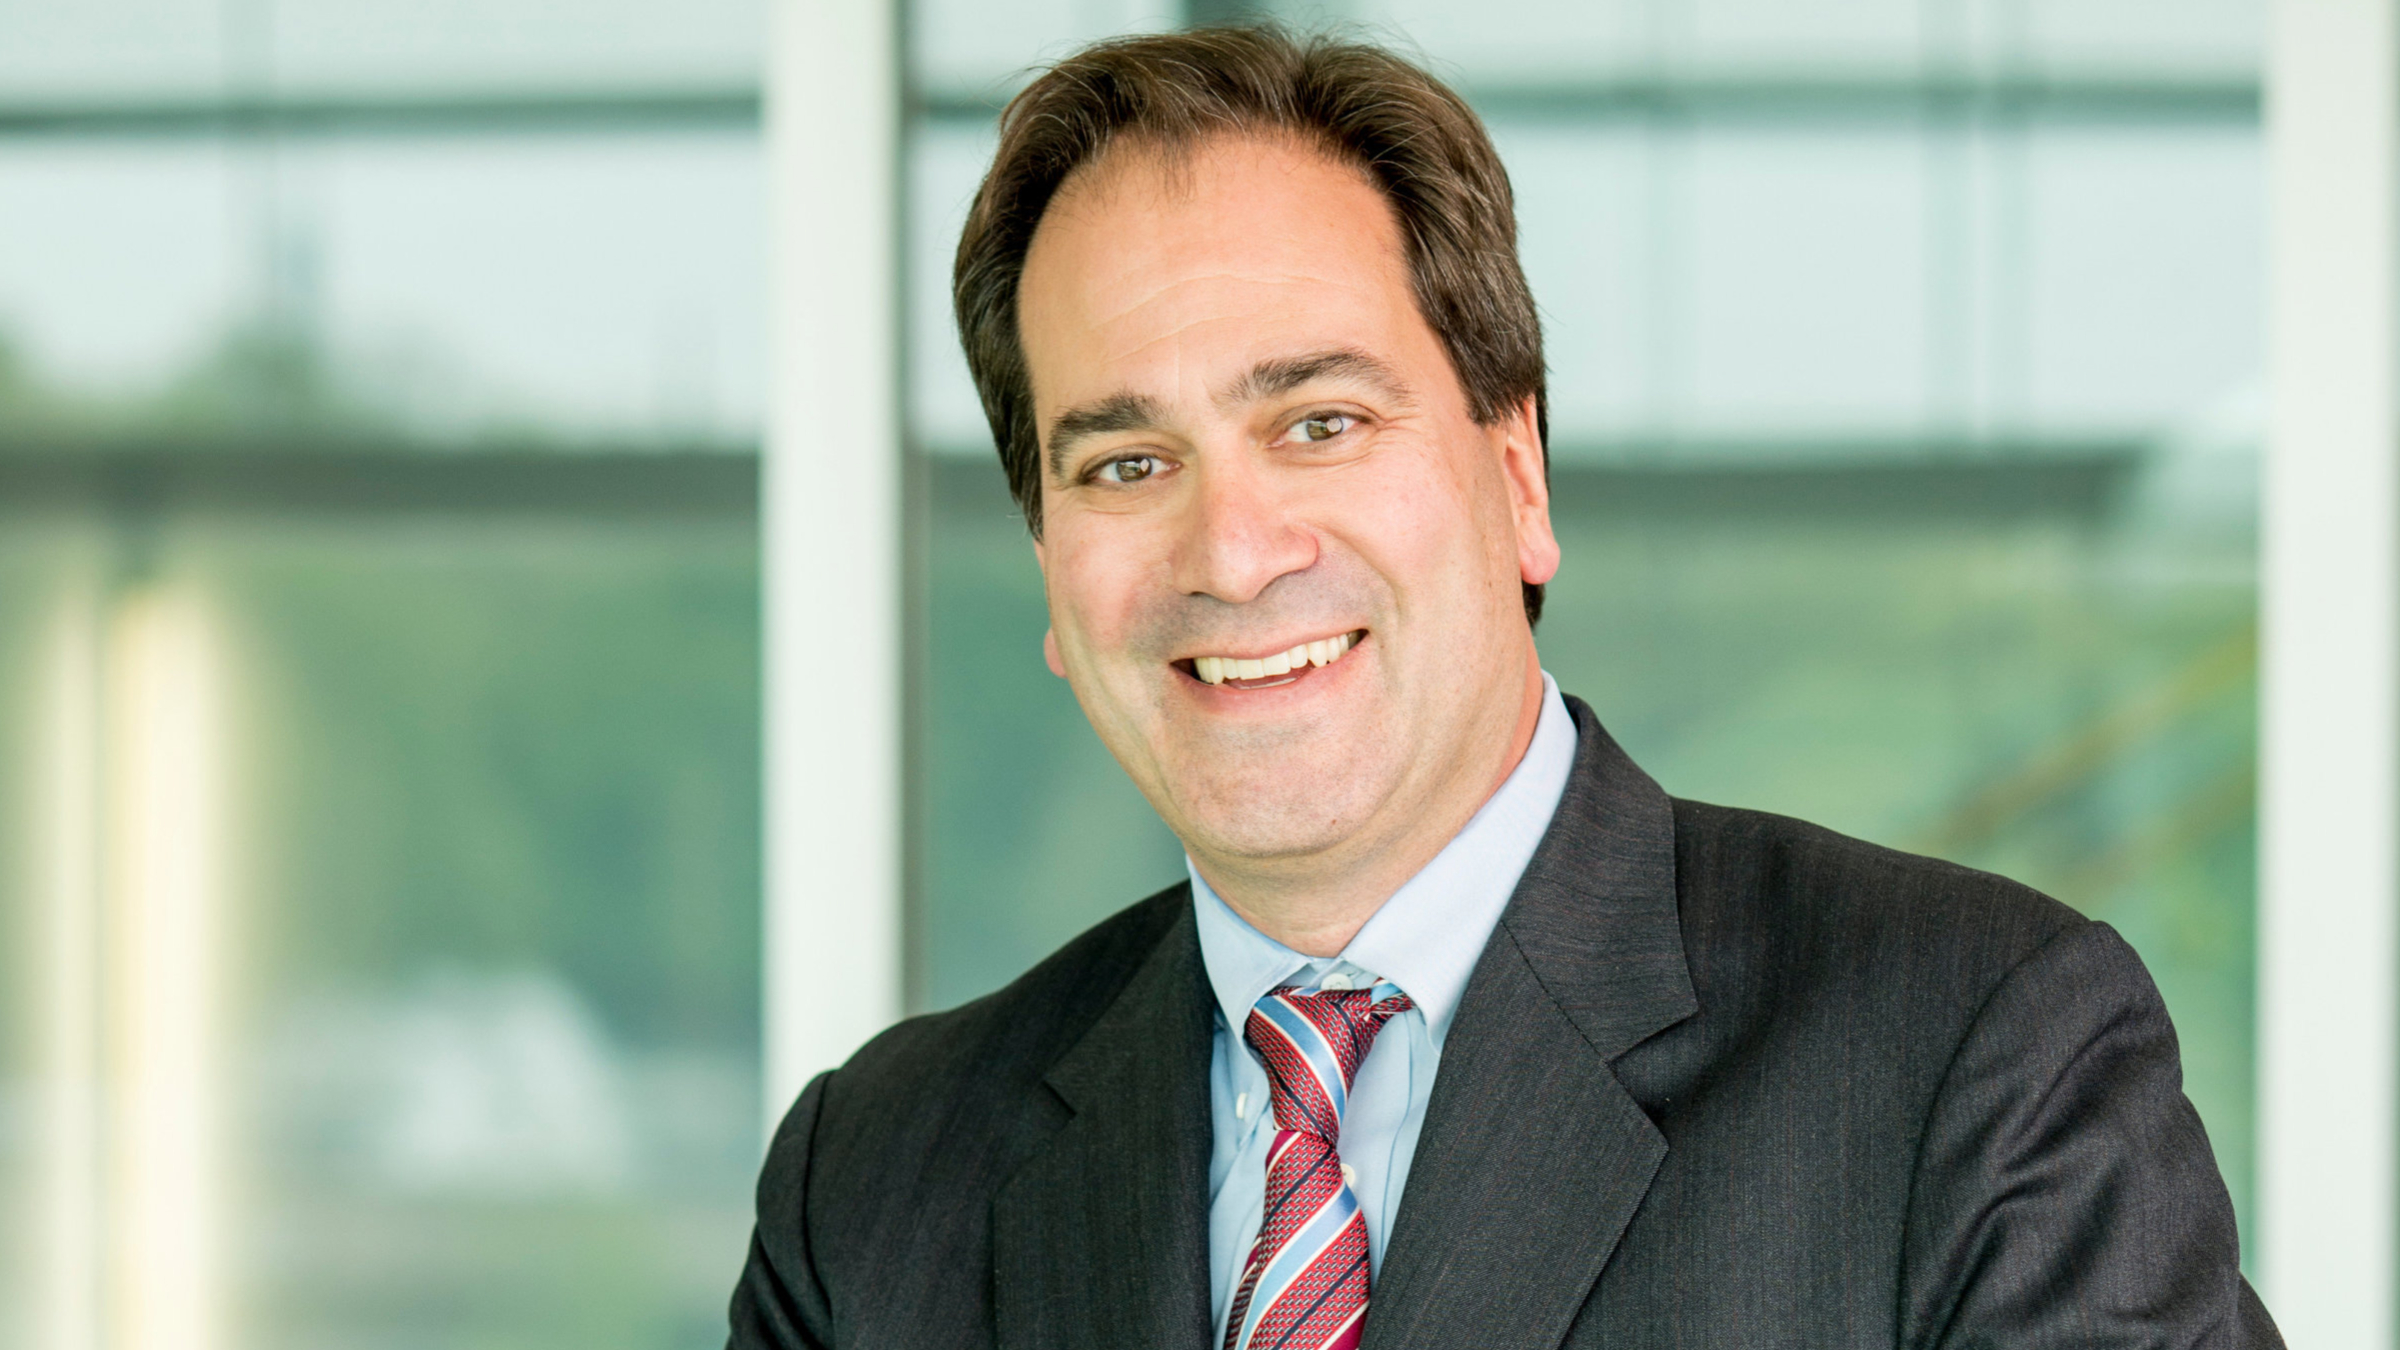 'The field is at a flashpoint': New Chad Mirkin-founded biotech hopes to make more effective cancer vaccines - Endpoints News